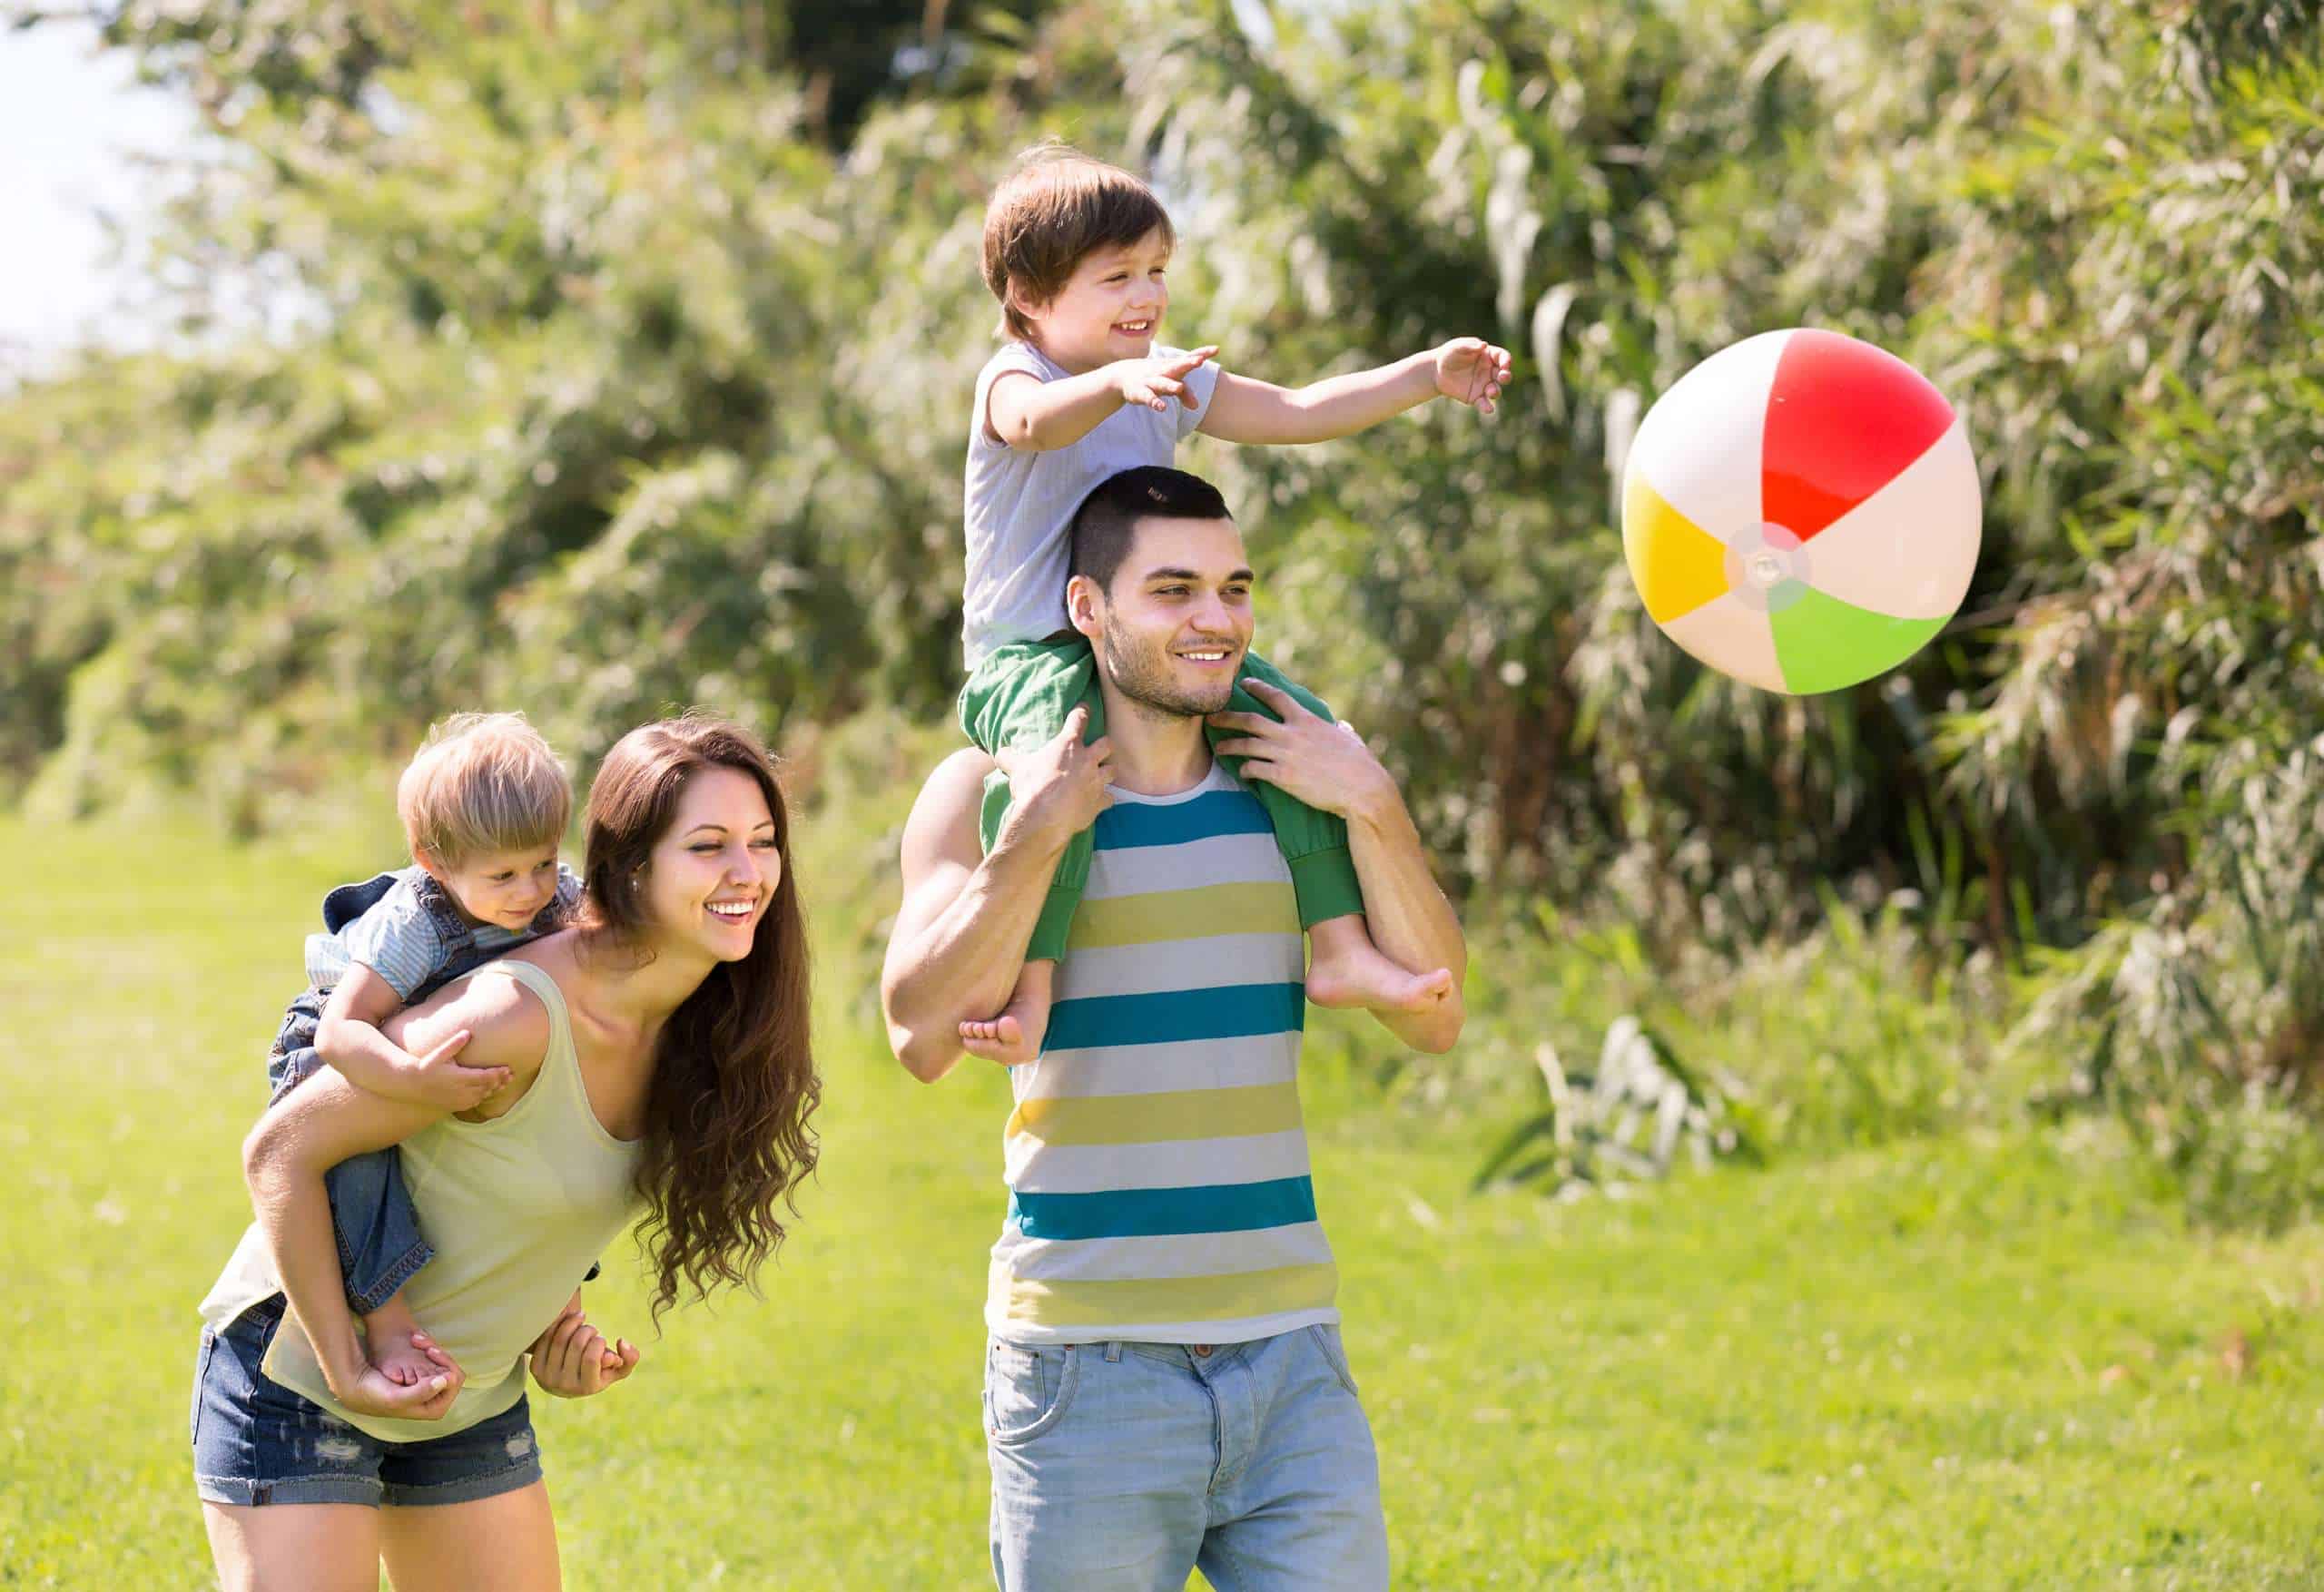 Sport with your family. More events for active families!